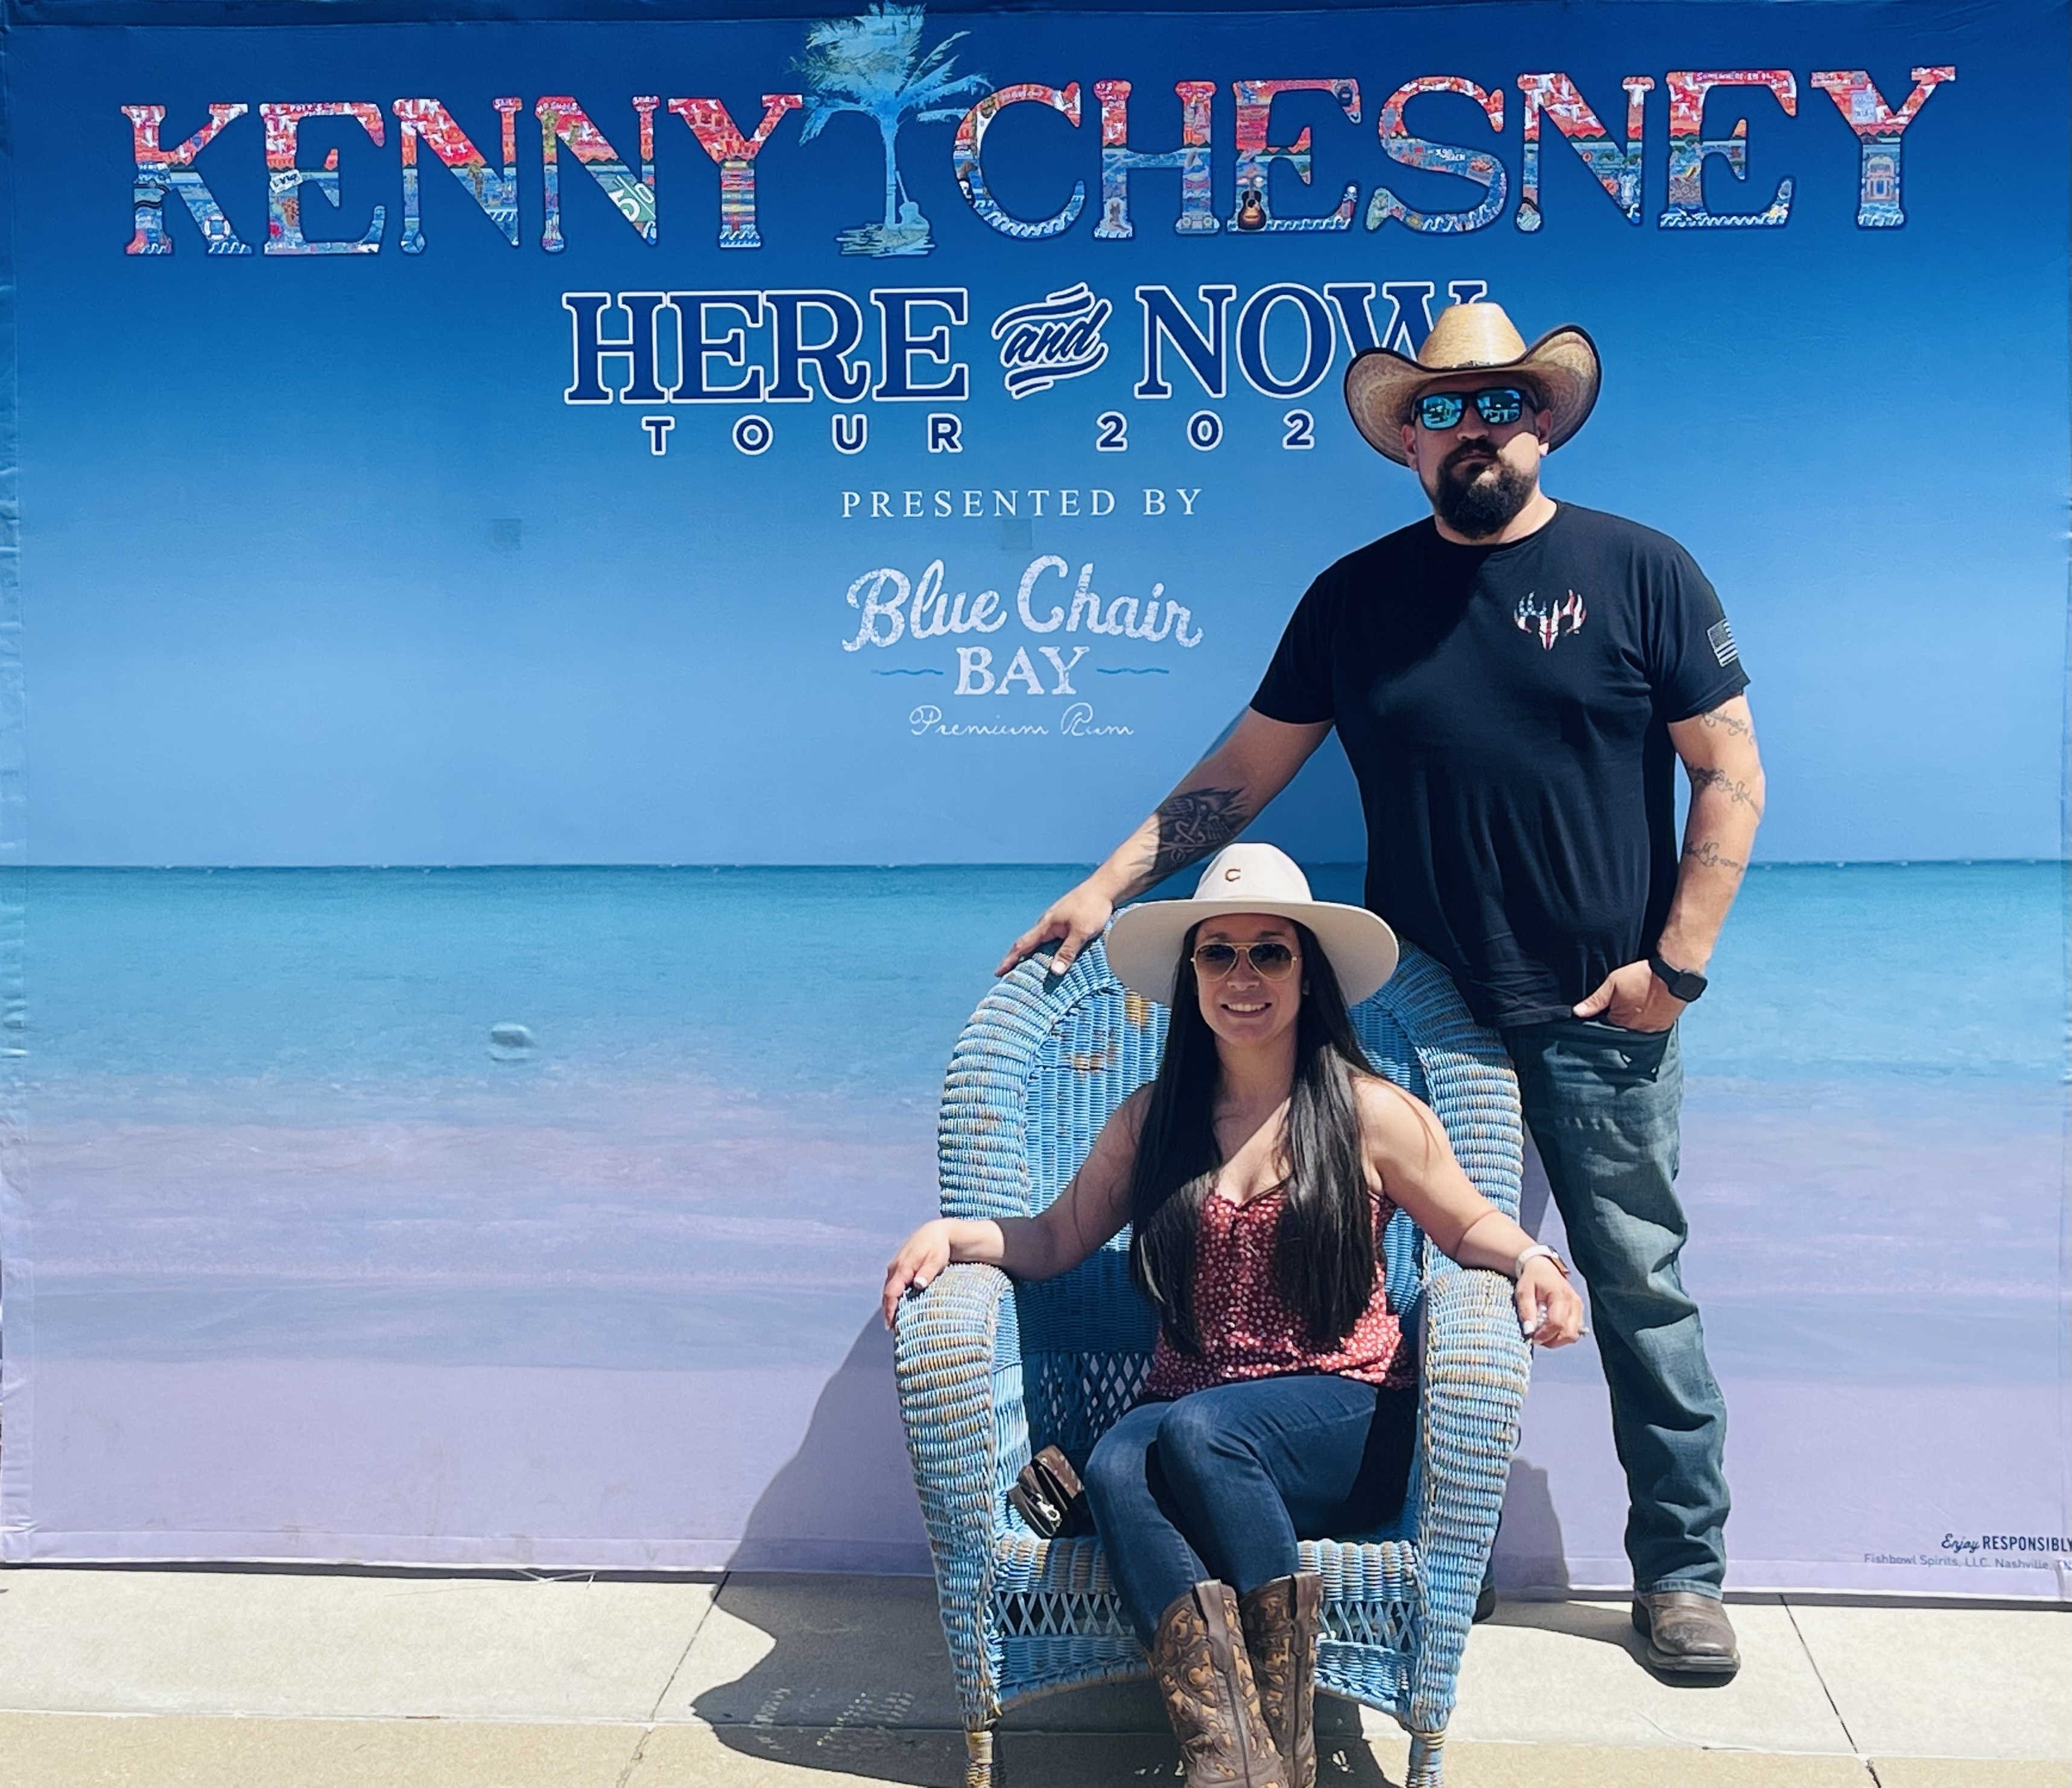 Kenny Chesney: Here & Now our 2022